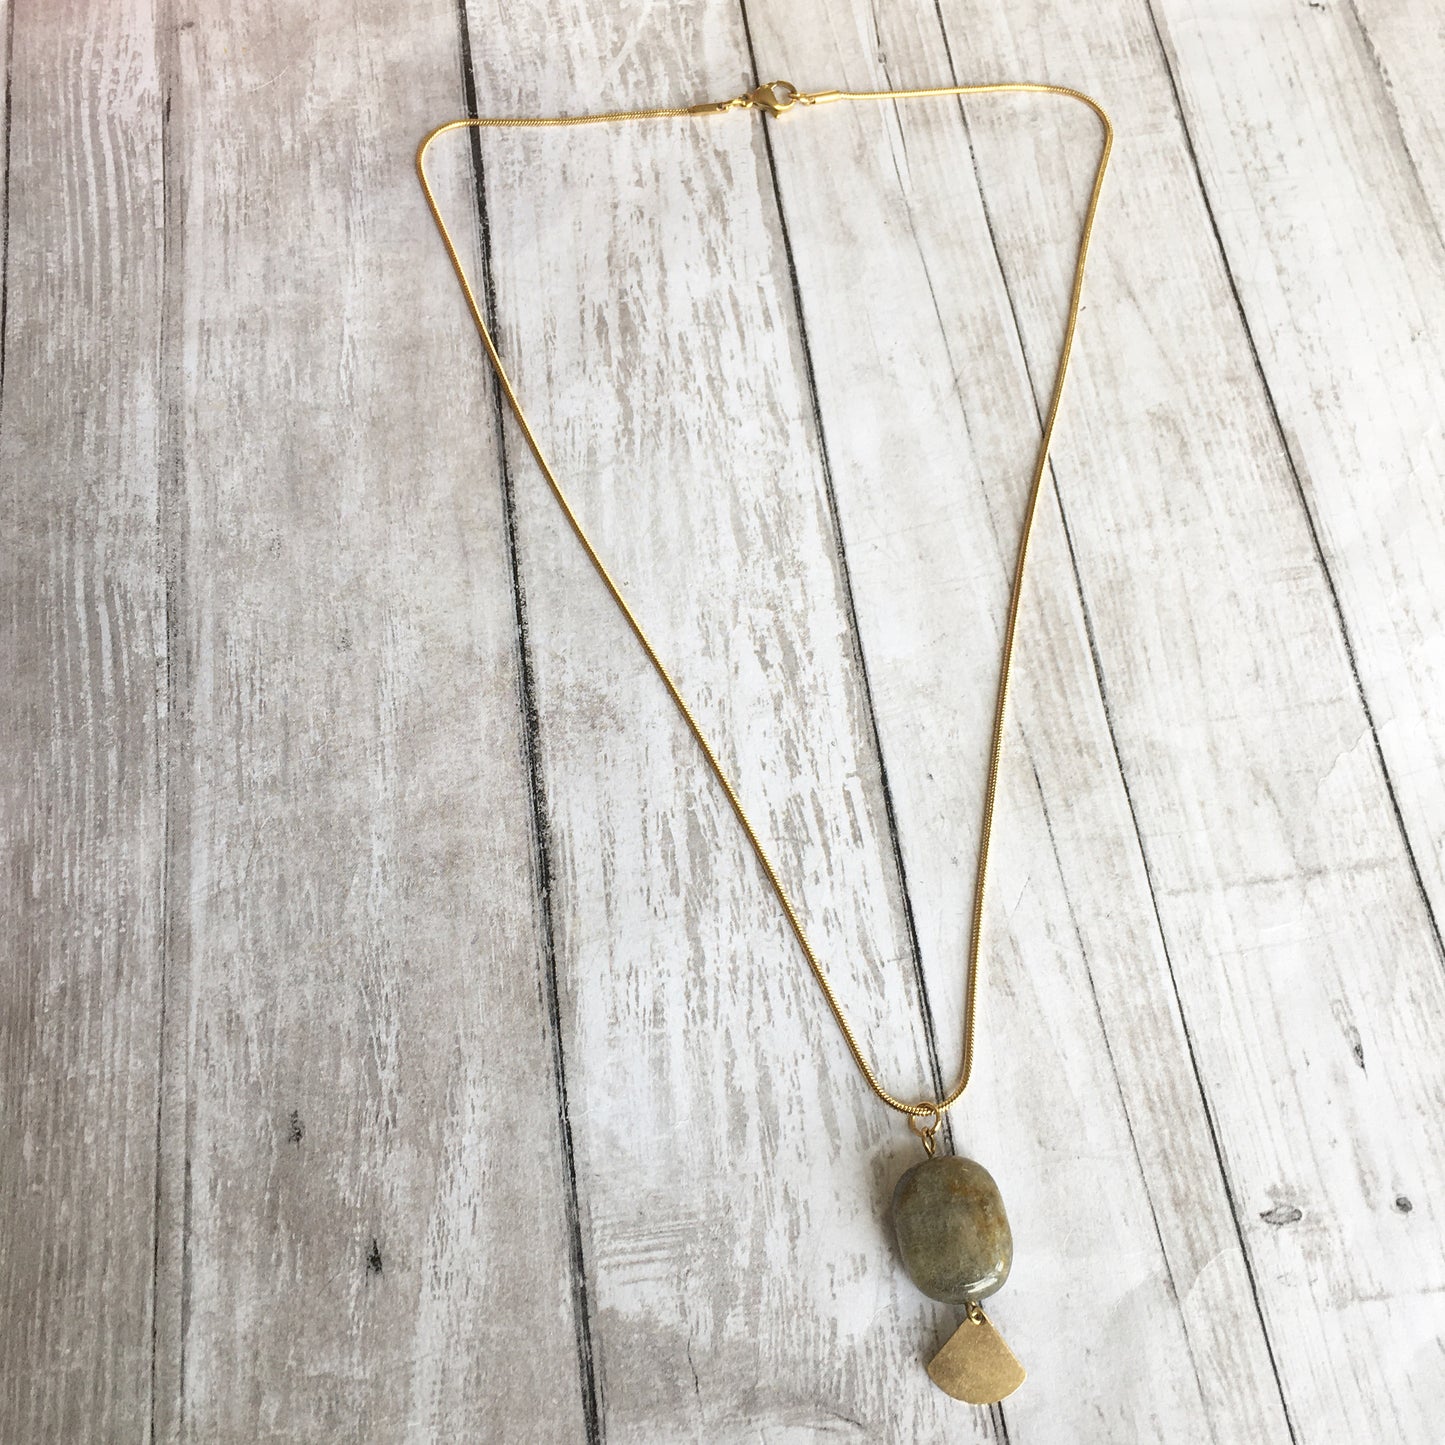 The Good Intentions Necklace